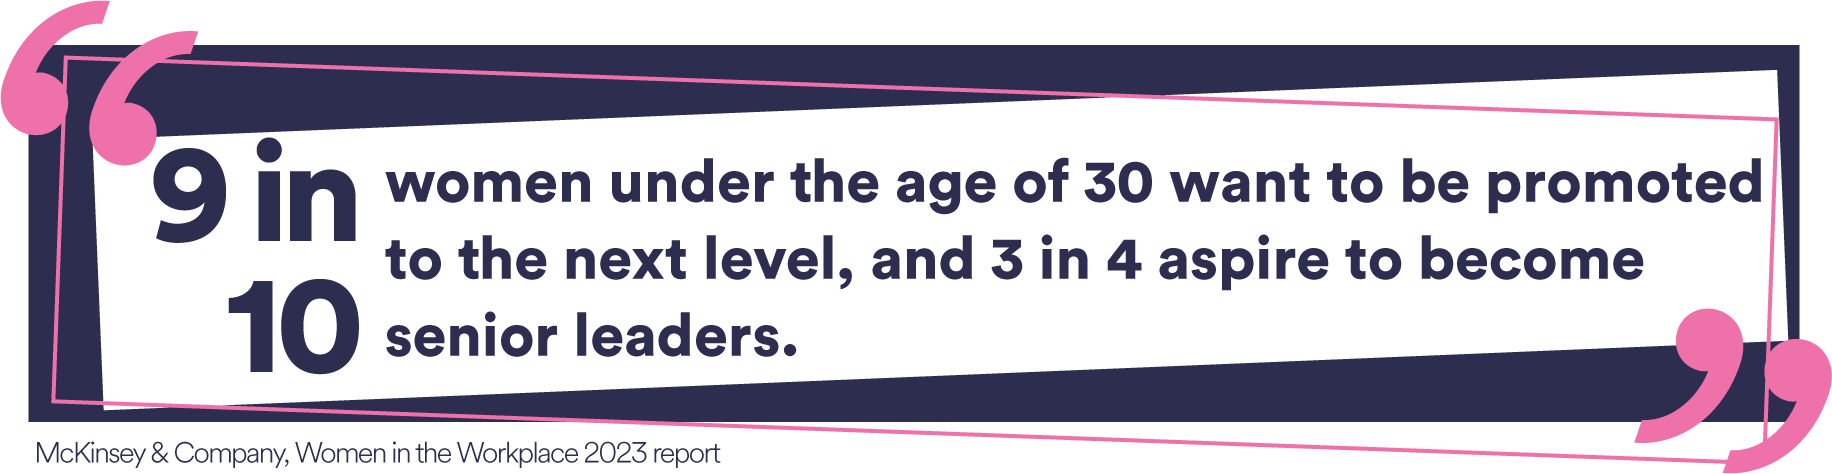 “Nine in ten women under the age of 30 want to be promoted to the next level, and three in four aspire to become senior leaders.” McKinsey & Company, Women in the Workplace 2023 report